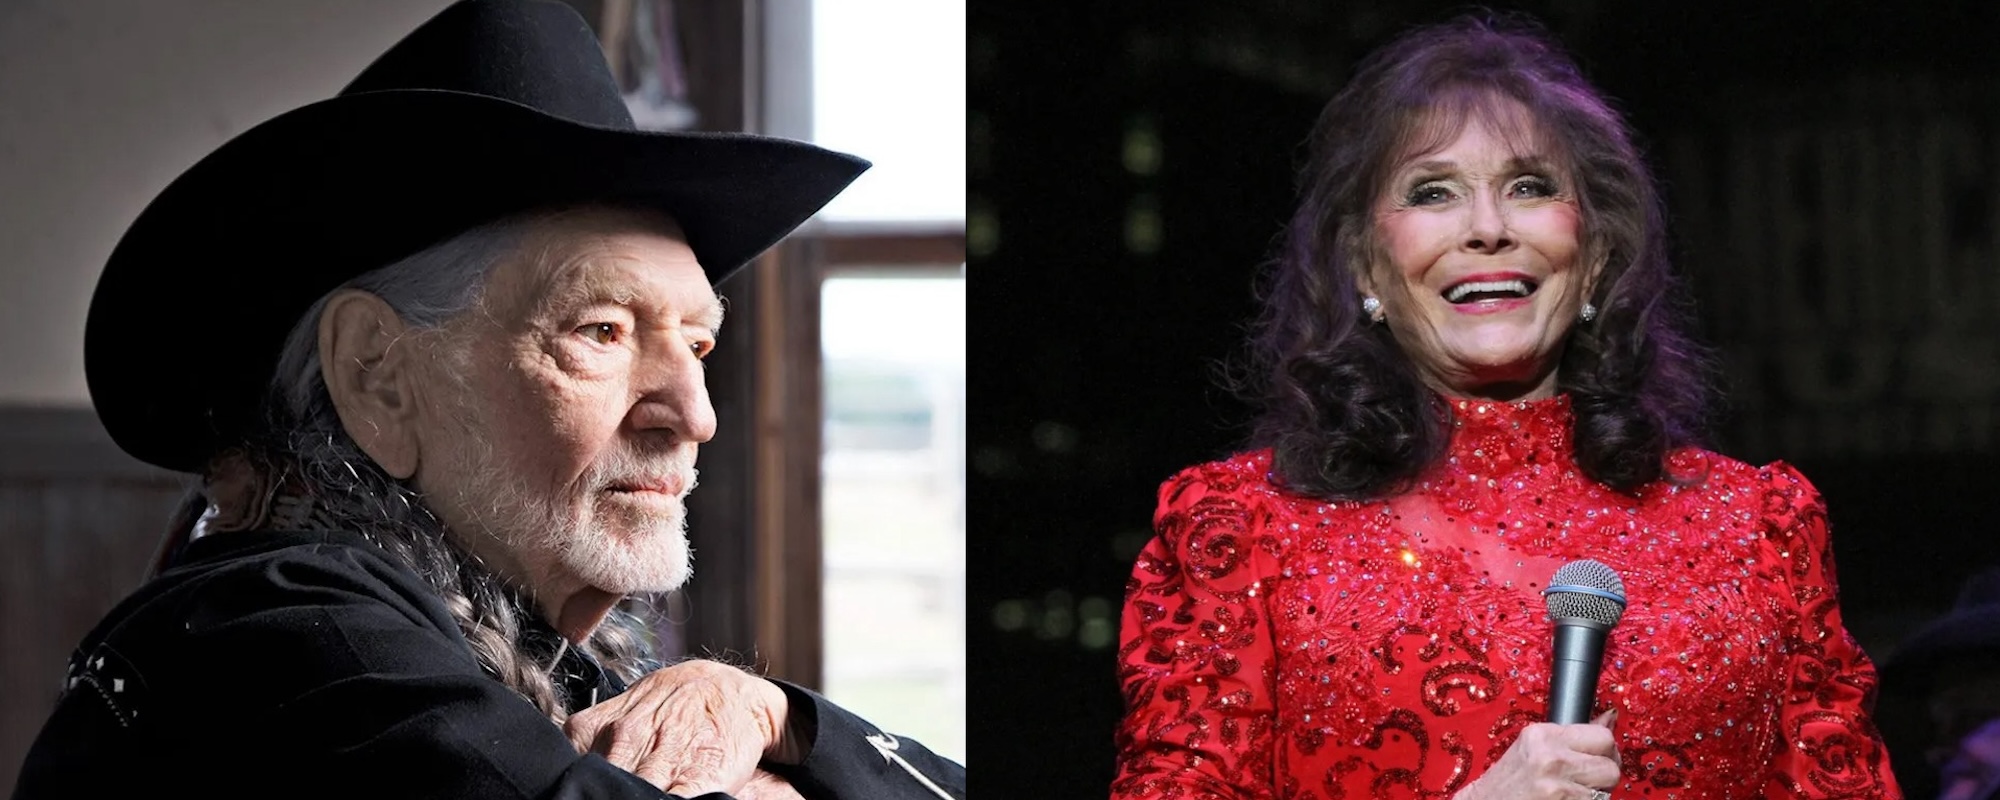 Coming ‘Full Circle’: The Story Behind the First and Only Duet Between Loretta Lynn and Willie Nelson, “Lay Me Down”